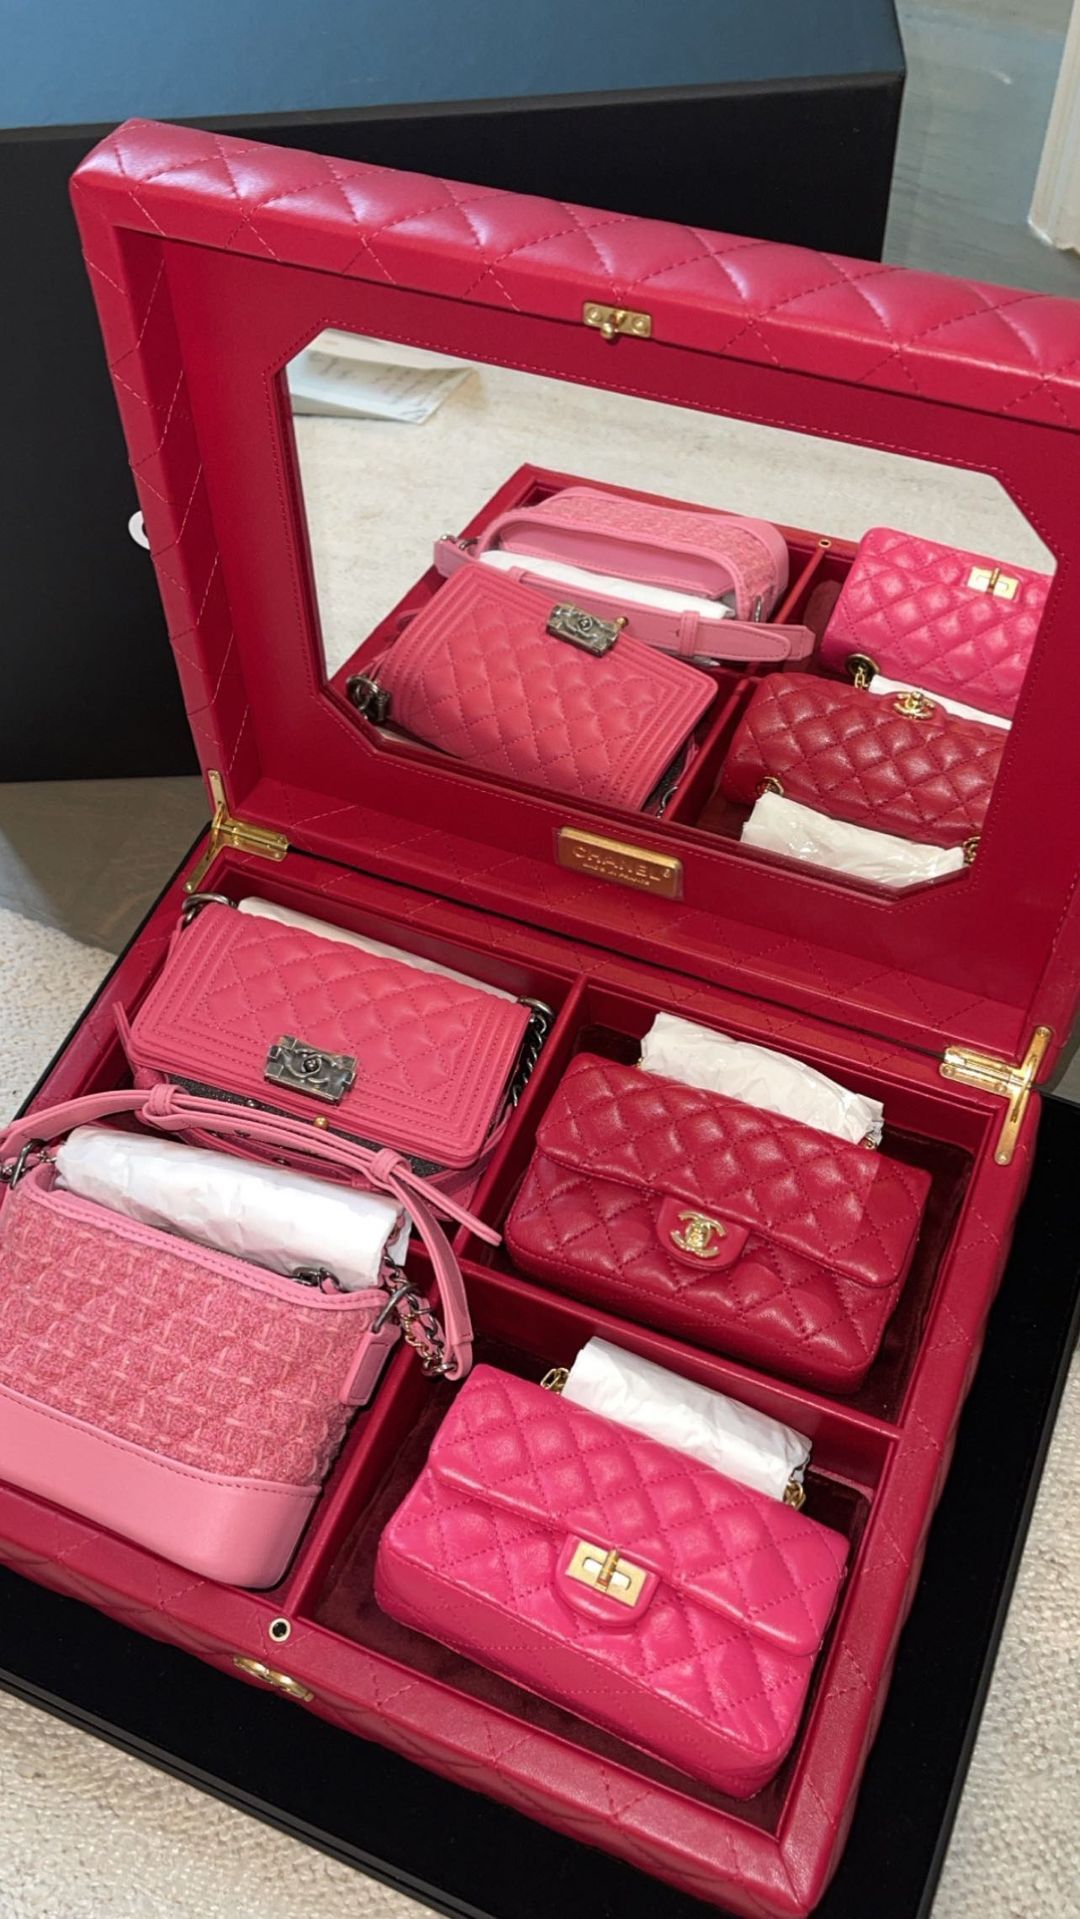 Travis Scott got her four pink and red Chanel bags